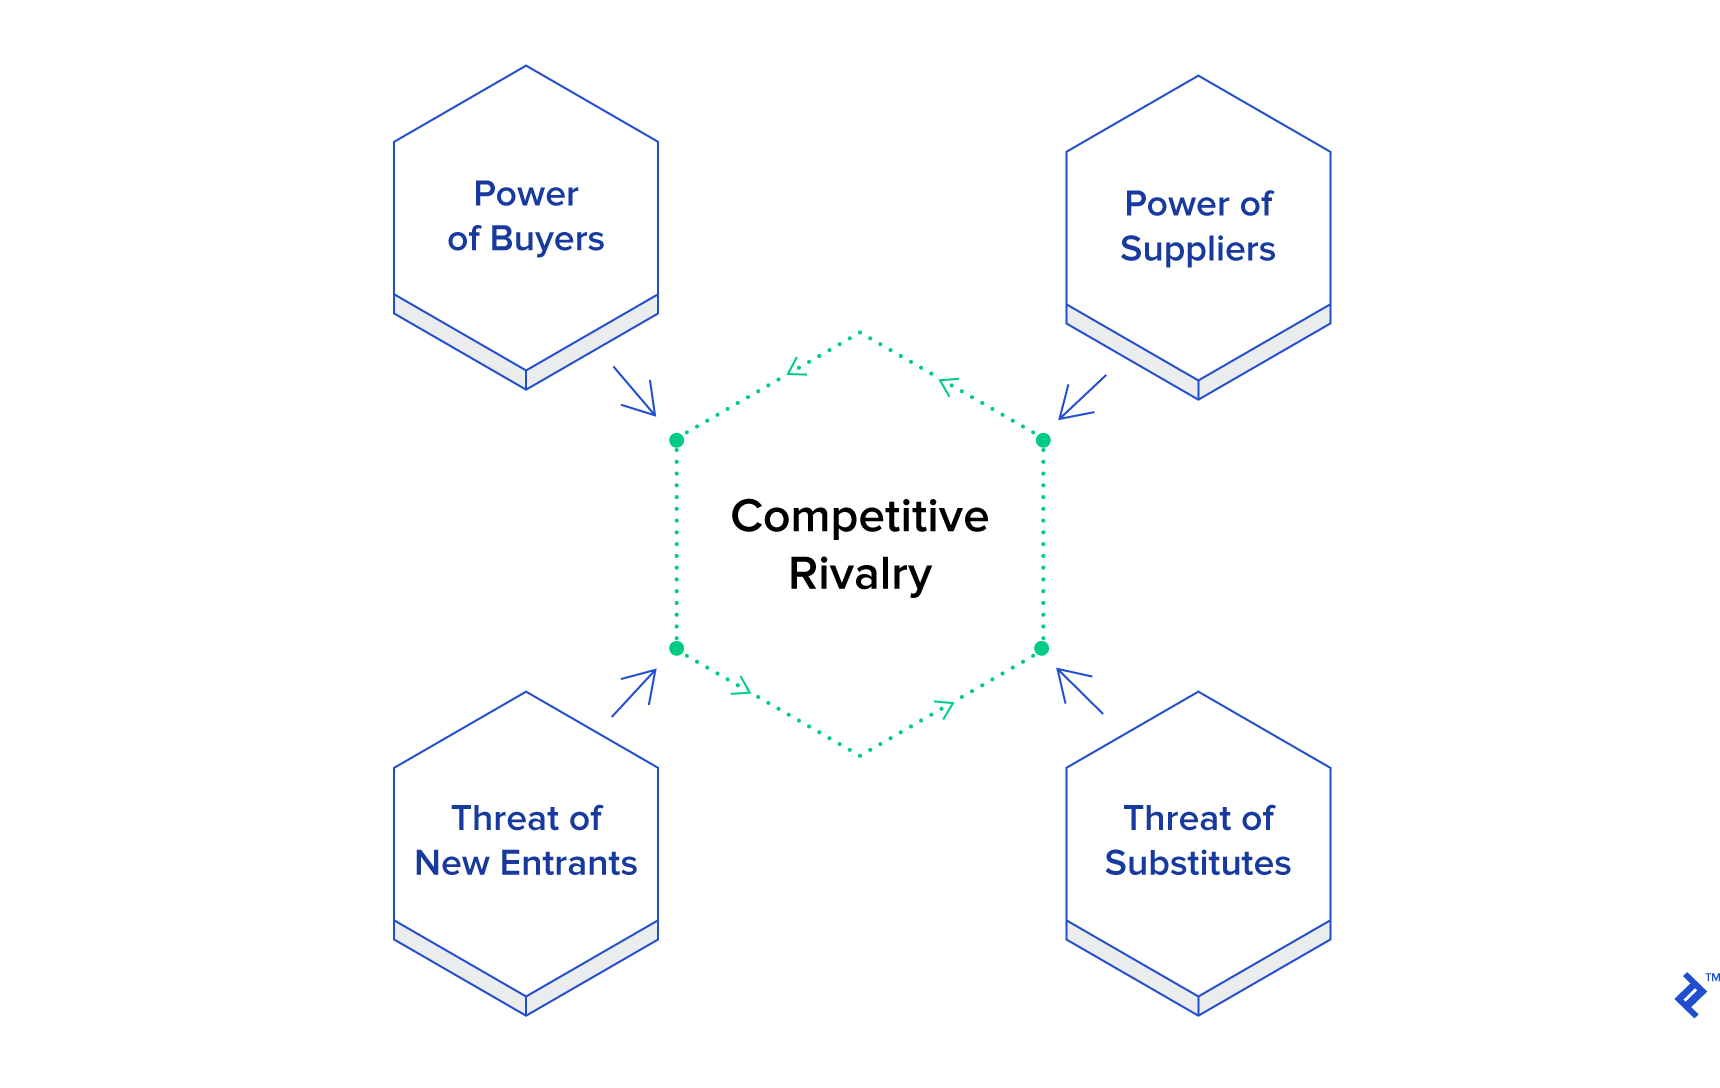 Industry Analysis and Porter’s Five Forces: A Deeper Look at Buyer Power